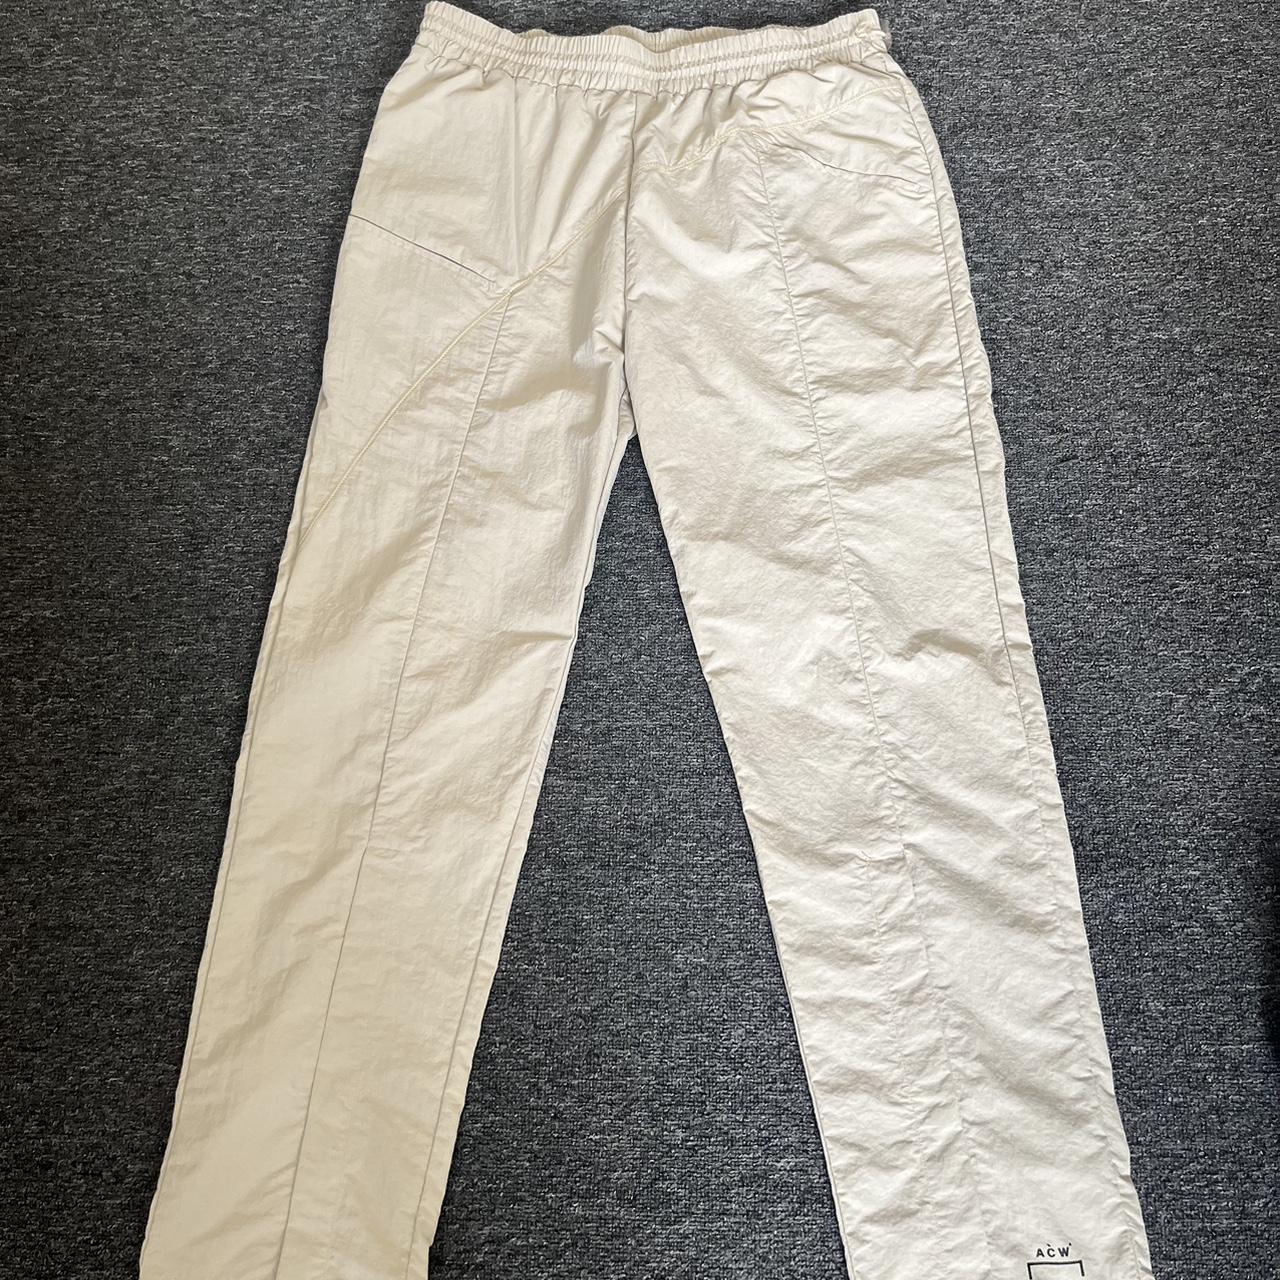 19th Century ACW Federal Foot Trousers | eBay